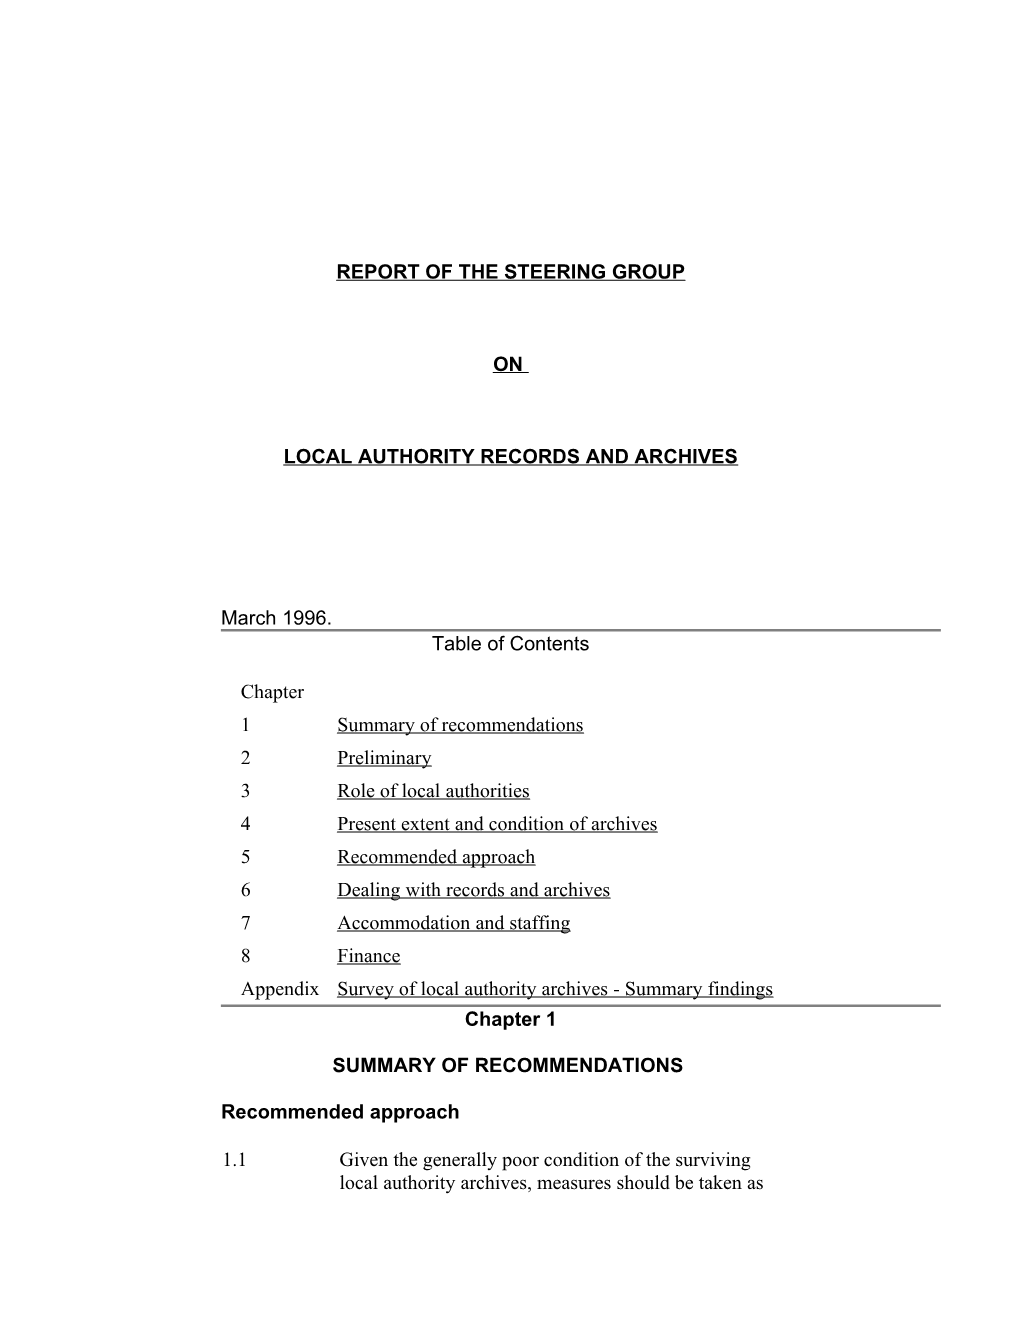 Report of the Steering Group on Local Authority Records and Archives